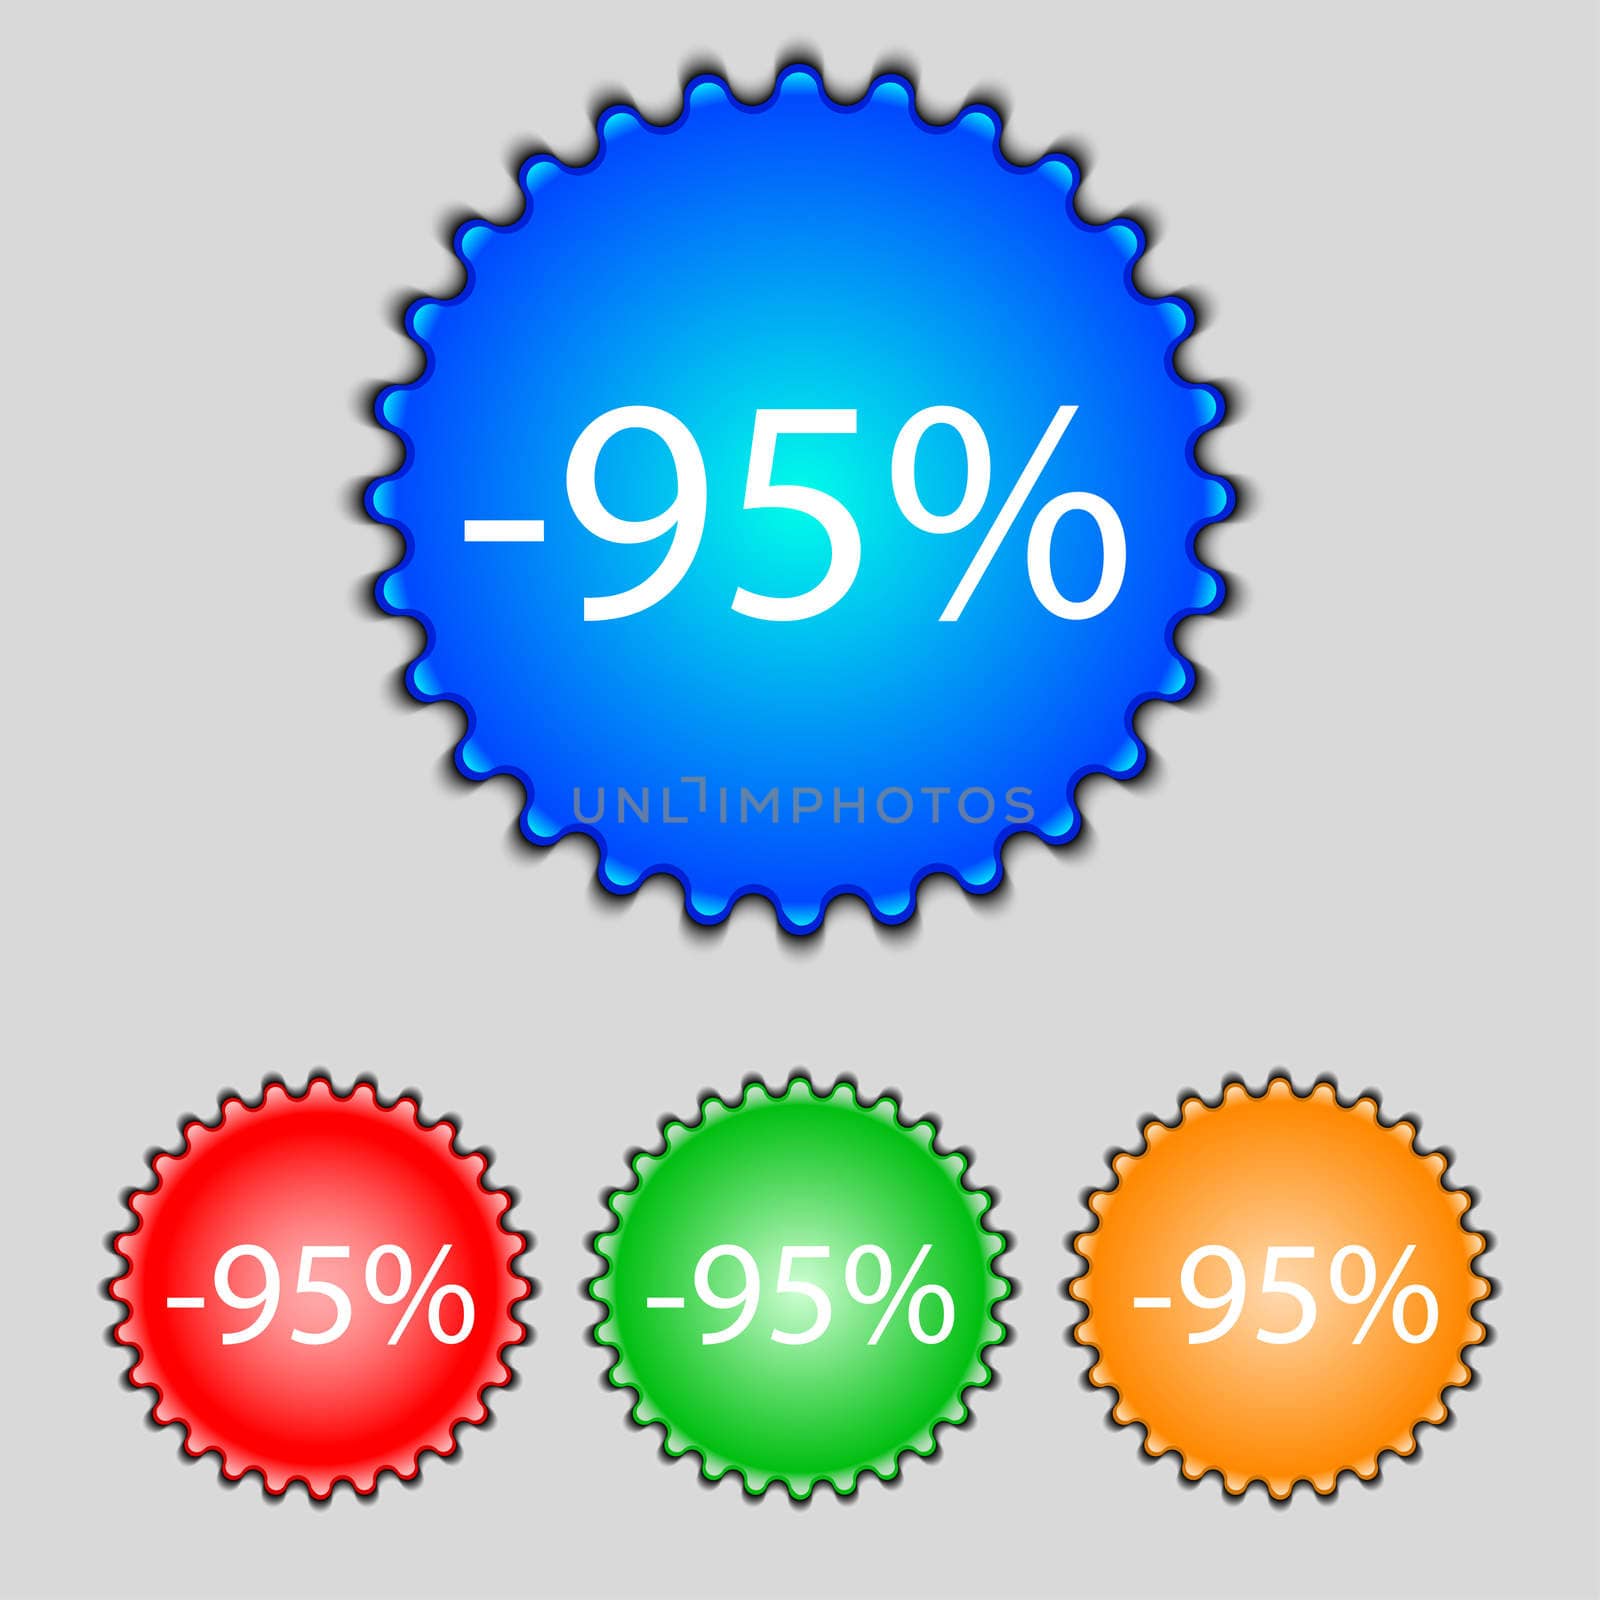 95 percent discount sign icon. Sale symbol. Special offer label. Set of colored buttons illustration